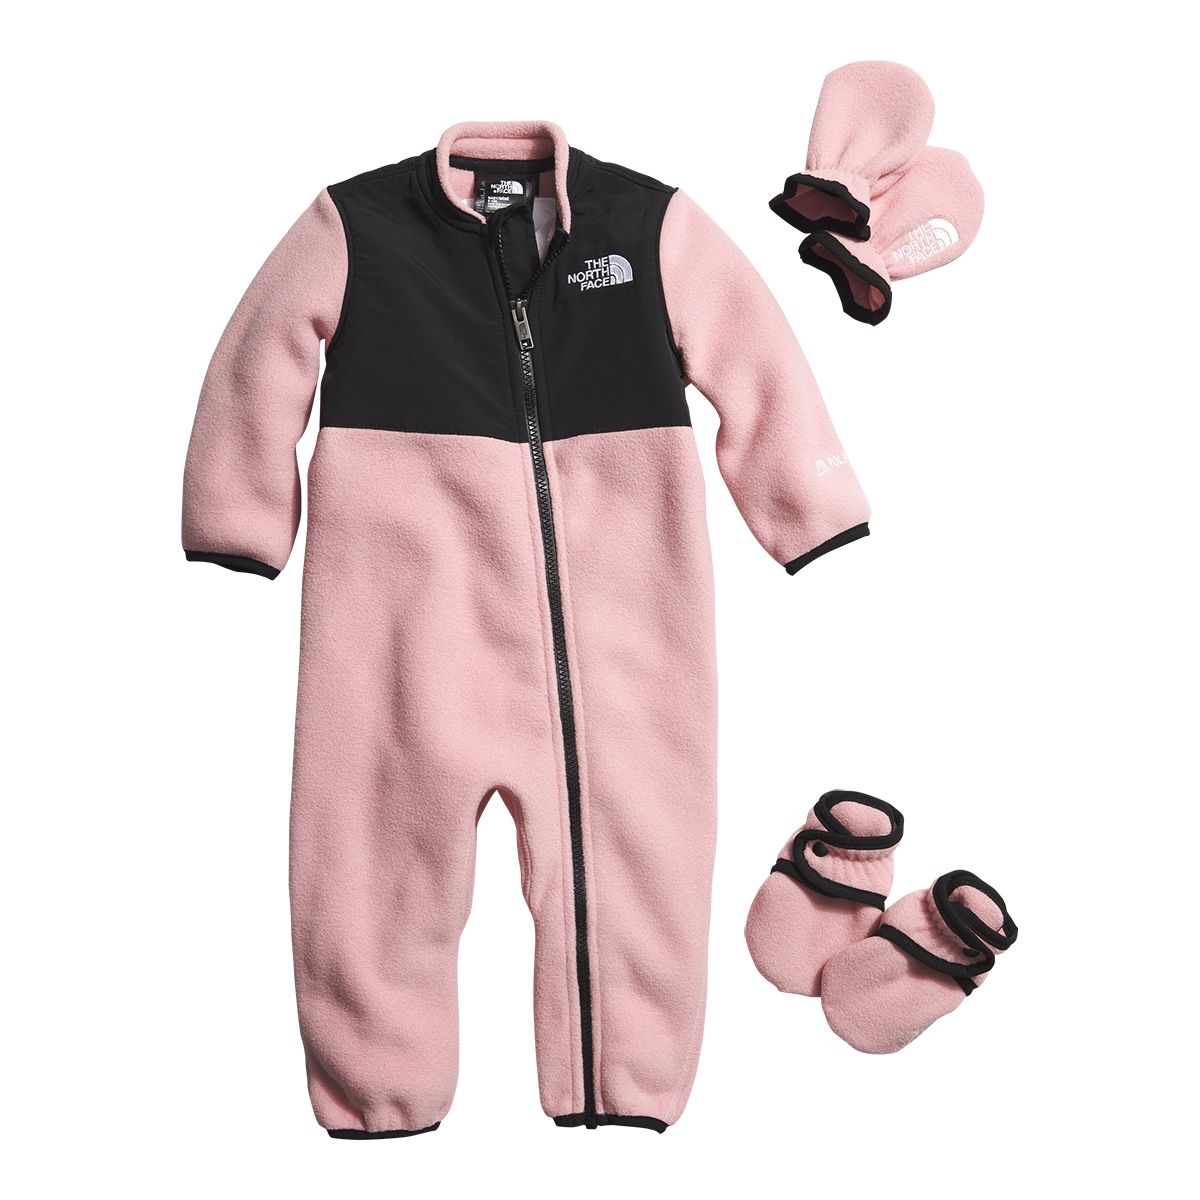 Image of The North Face Toddler Girls' Denali One Piece Set